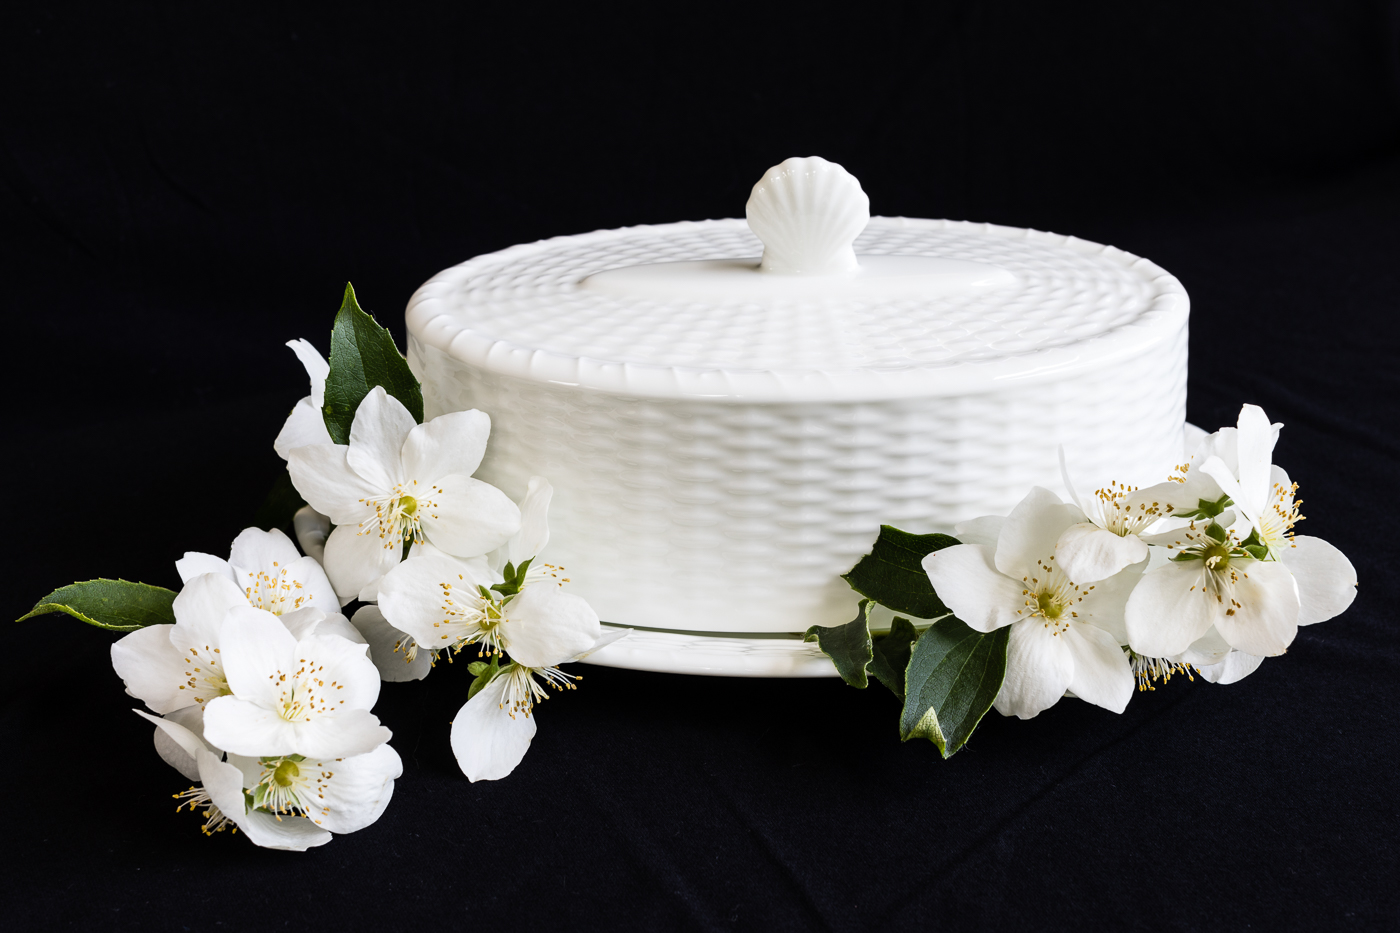 Covered Dish with Orange Blossoms